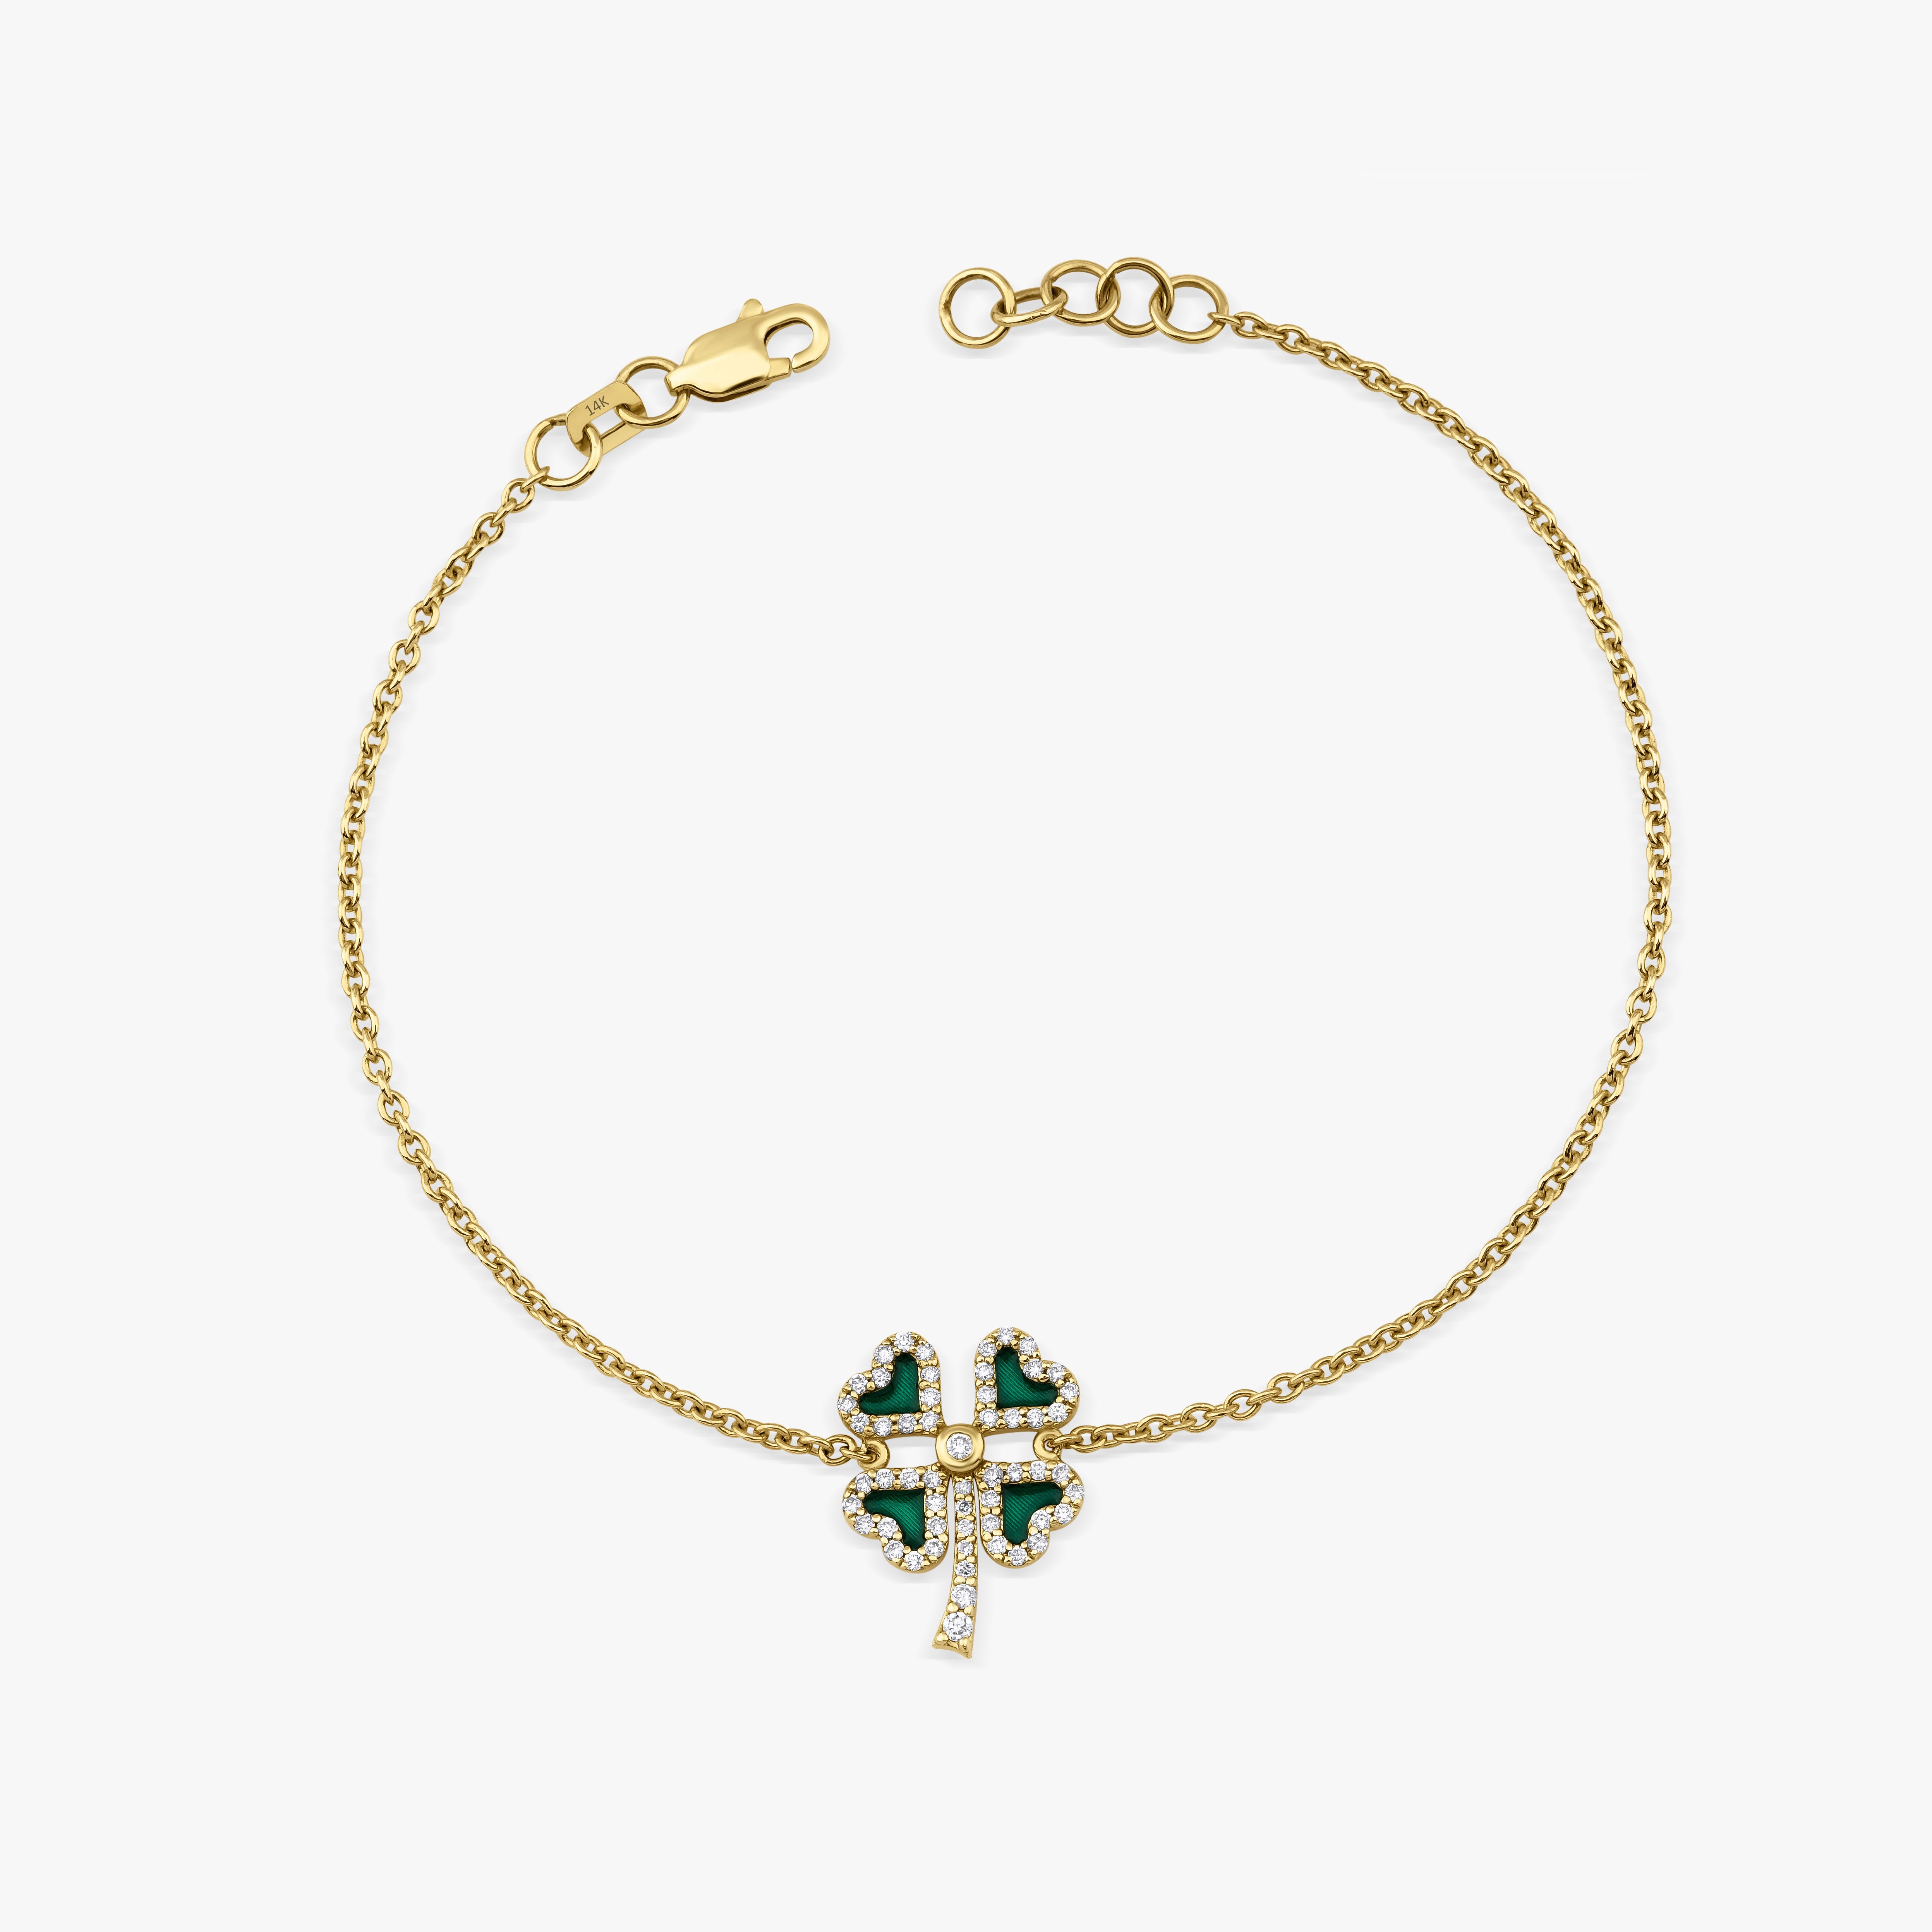 Diamond Four Leaf Clover Bracelet Available in 14K and 18K Gold / FORTUNA